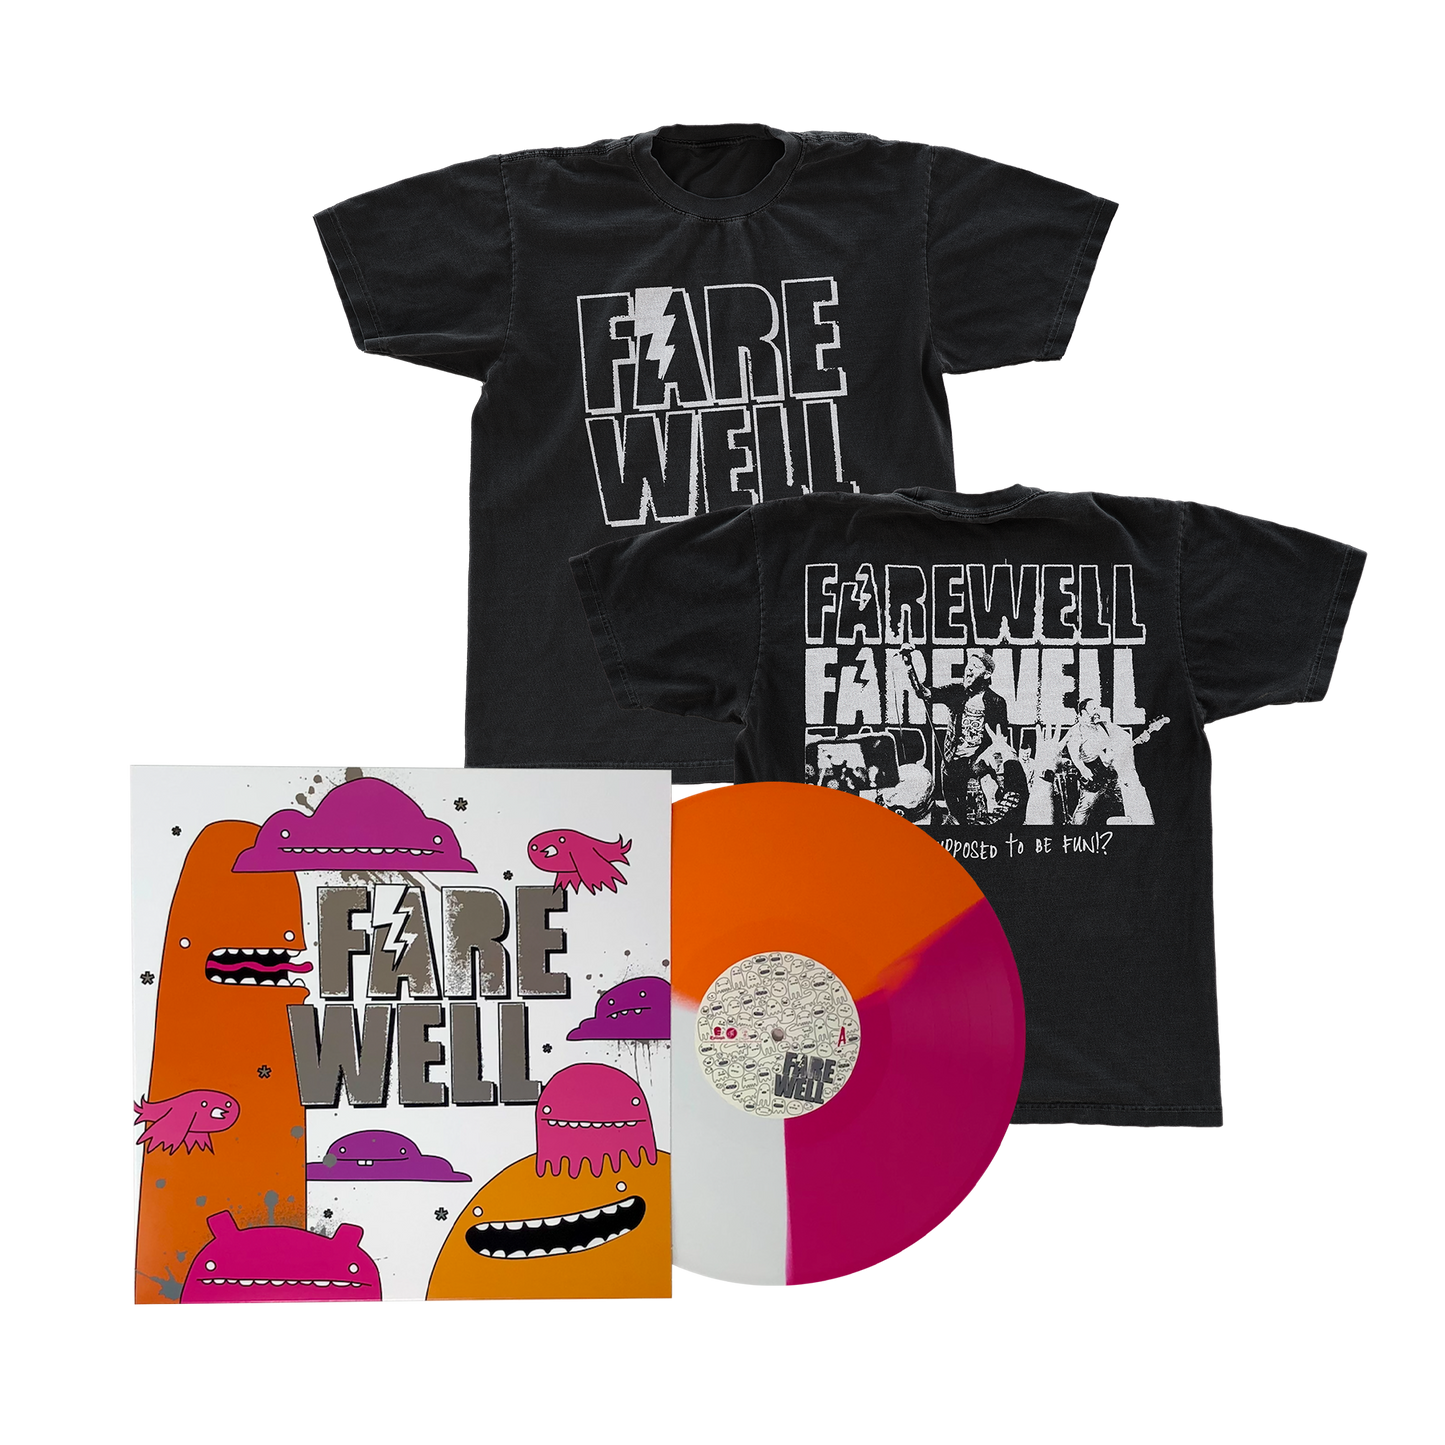 Farewell - "Isn't This Supposed To Be Fun" Vinyl & T-Shirt Bundle